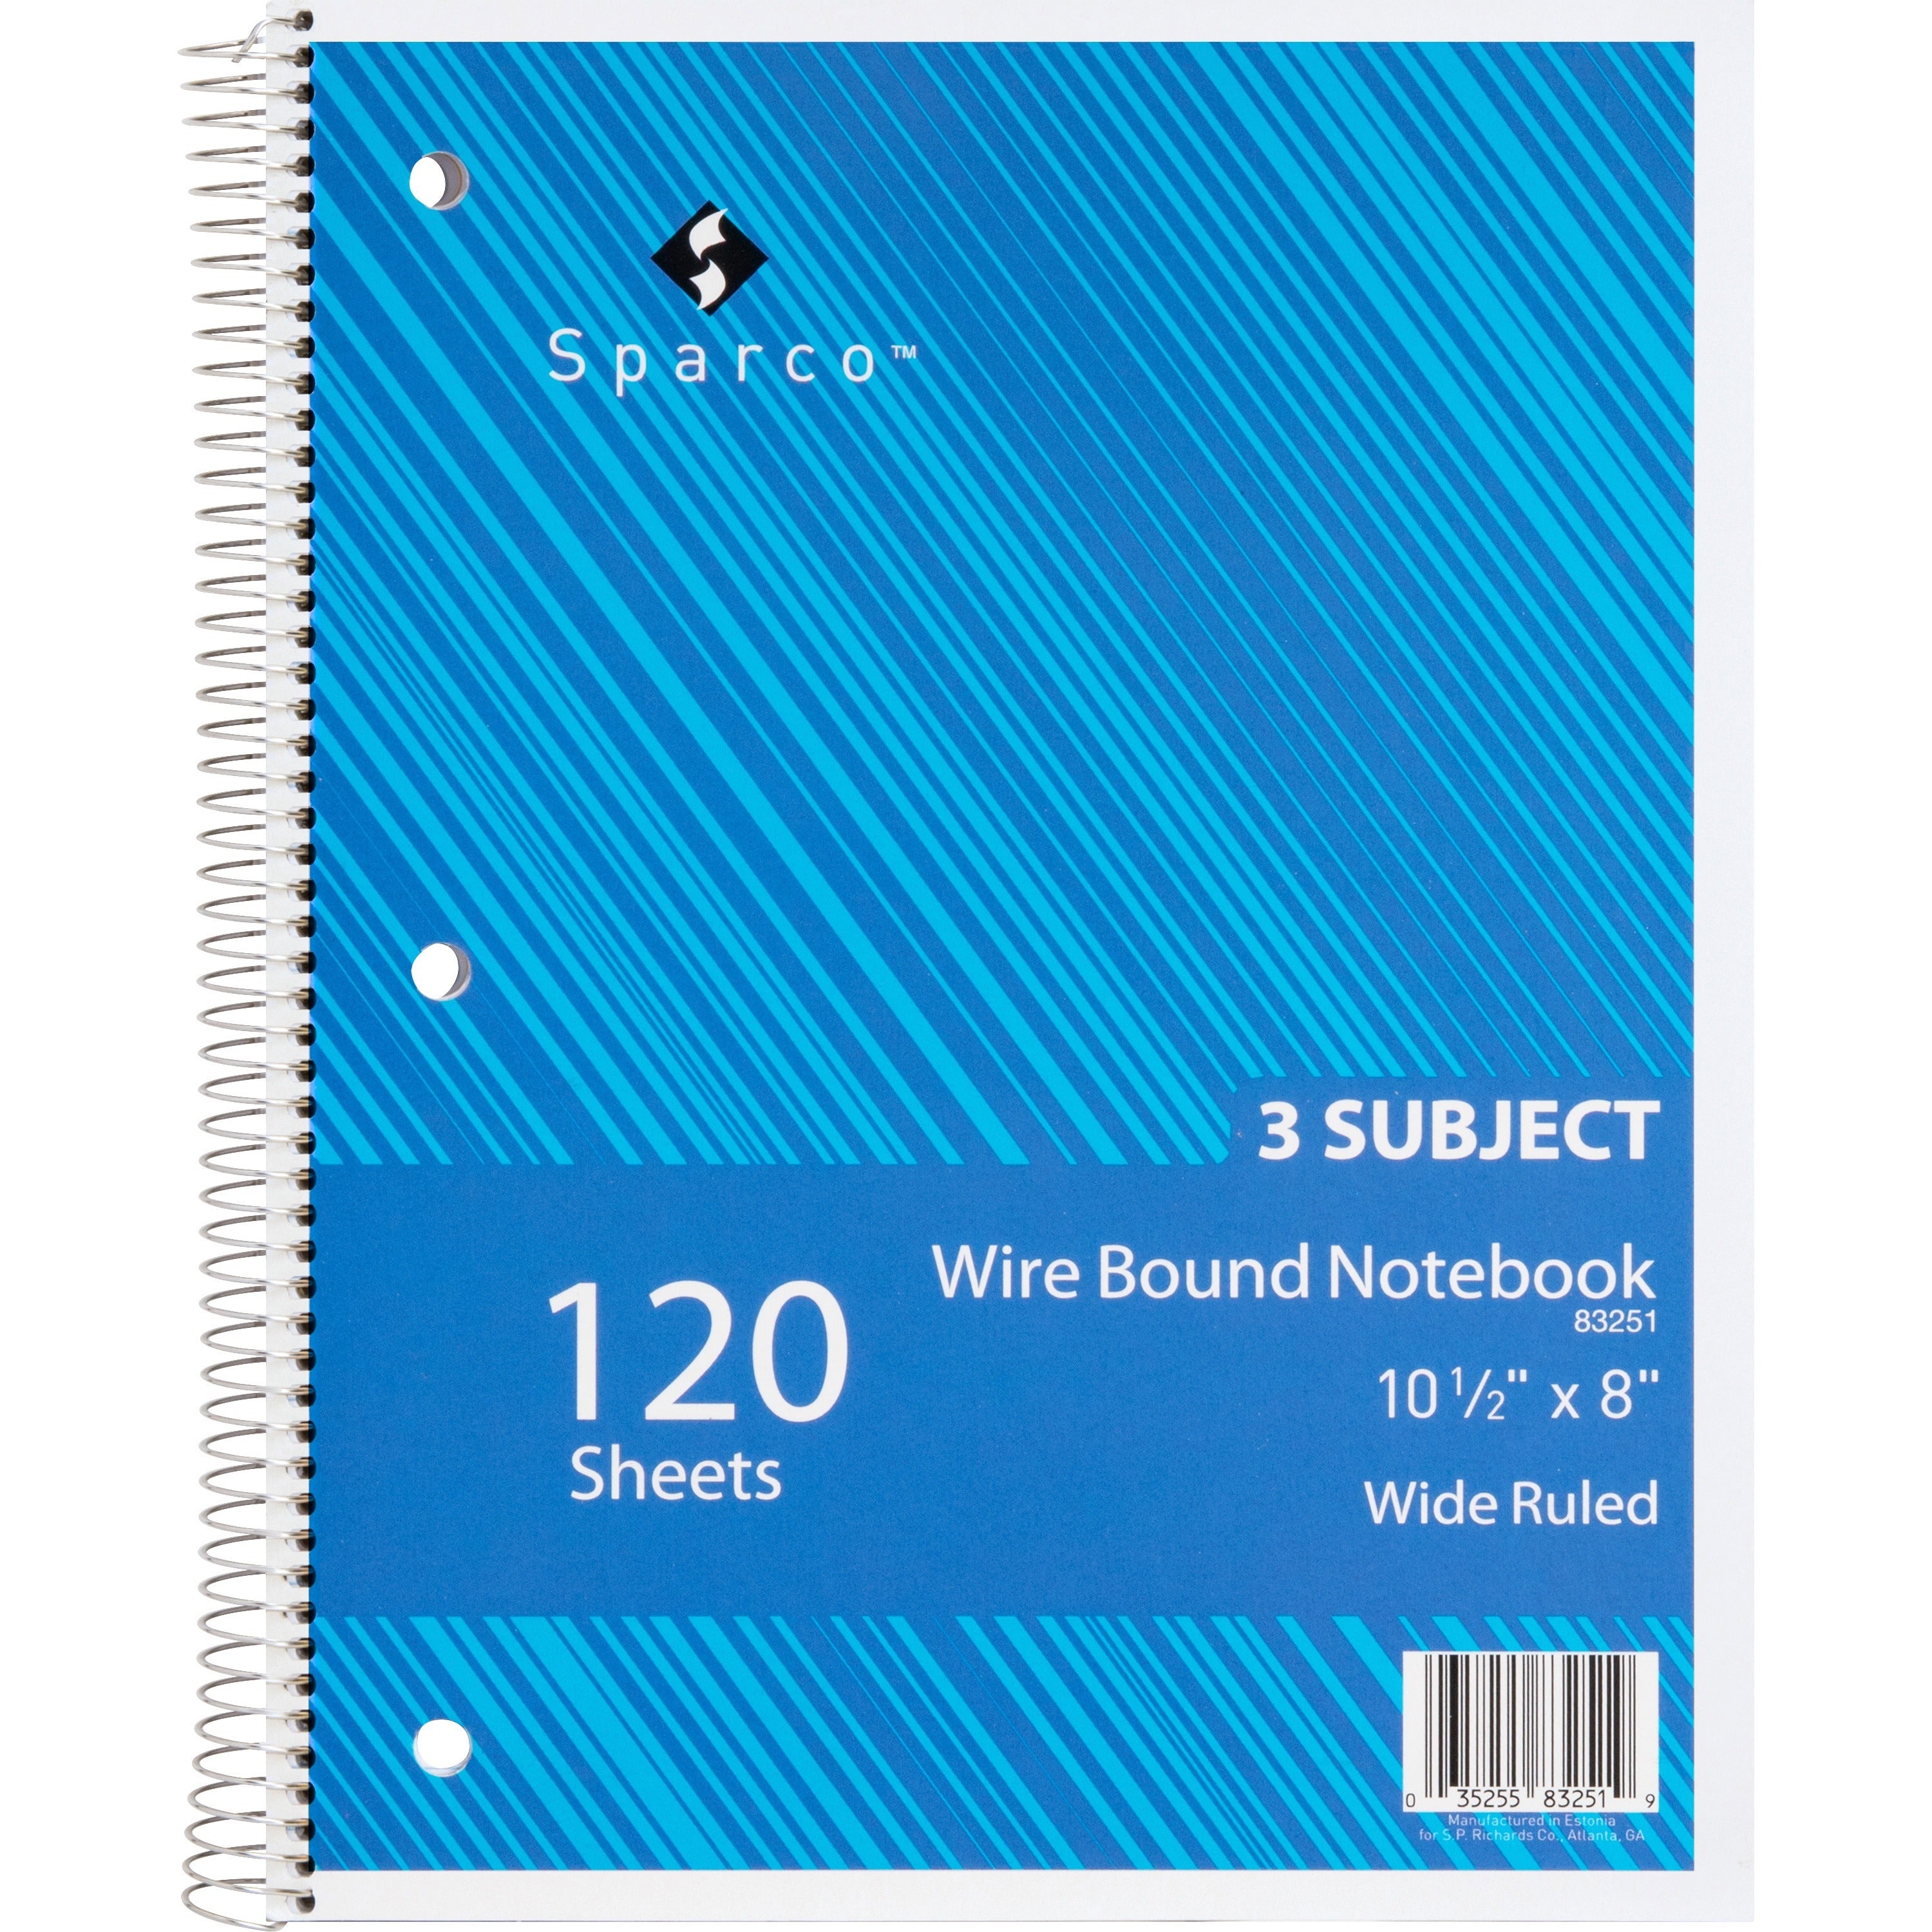 Sparco Quality 3HP Notebook - 3 Subject(s) - 120 Sheets - Wire Bound - Wide Ruled - Unruled Margin - 16 lb Basis Weight - 8" x 10 1/2" - Bright White Paper - AssortedChipboard Cover - Bleed Resistant, Stiff-cover - 1 Each - 